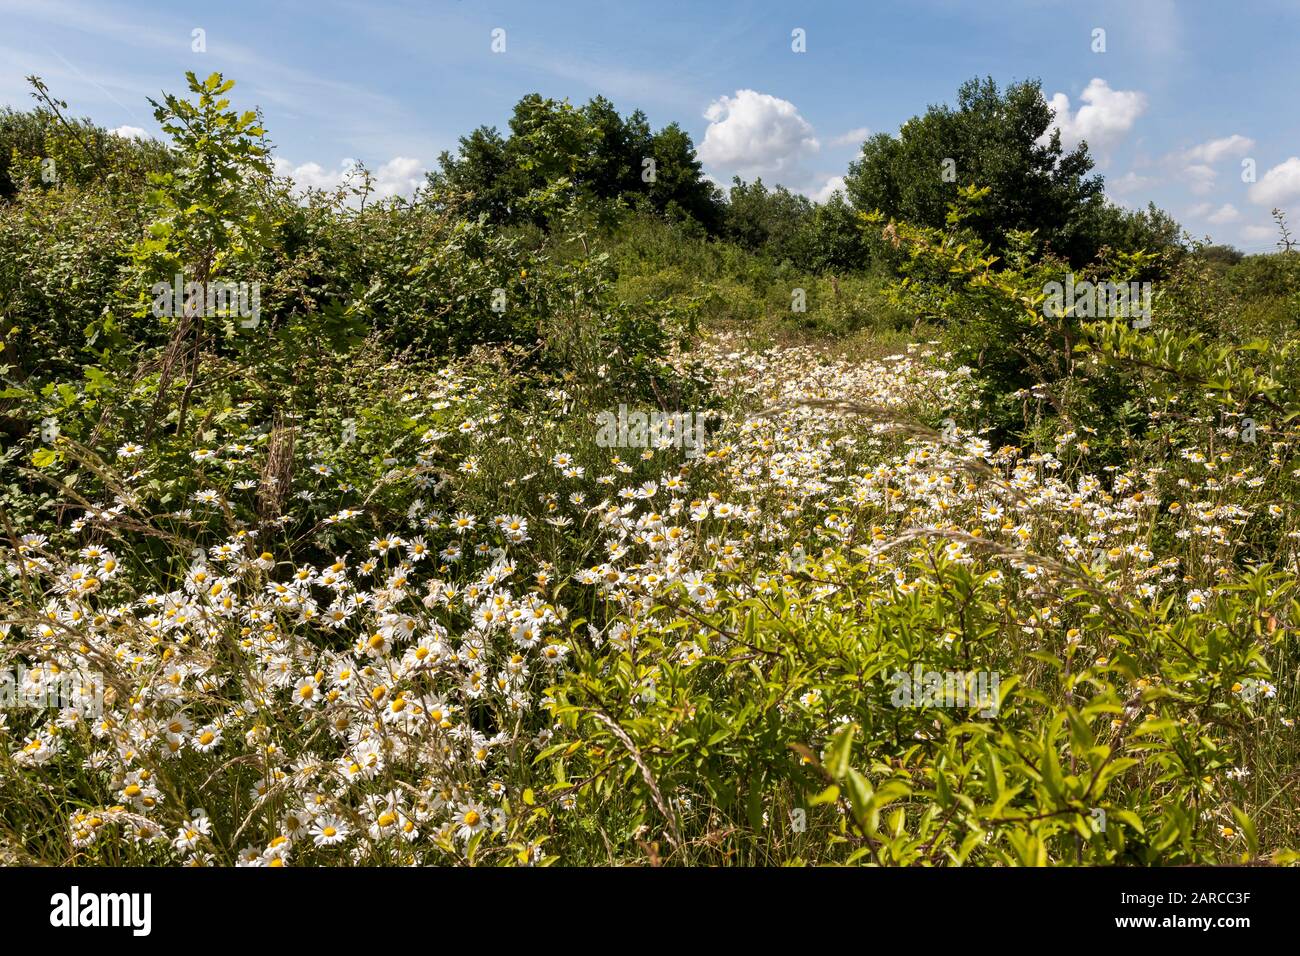 Oxeye daisies (Leucanthemum vulgare) growing on grassland in Alver Valley Country Park, Gosport, Hampshire, UK: an important nature conservation area Stock Photo